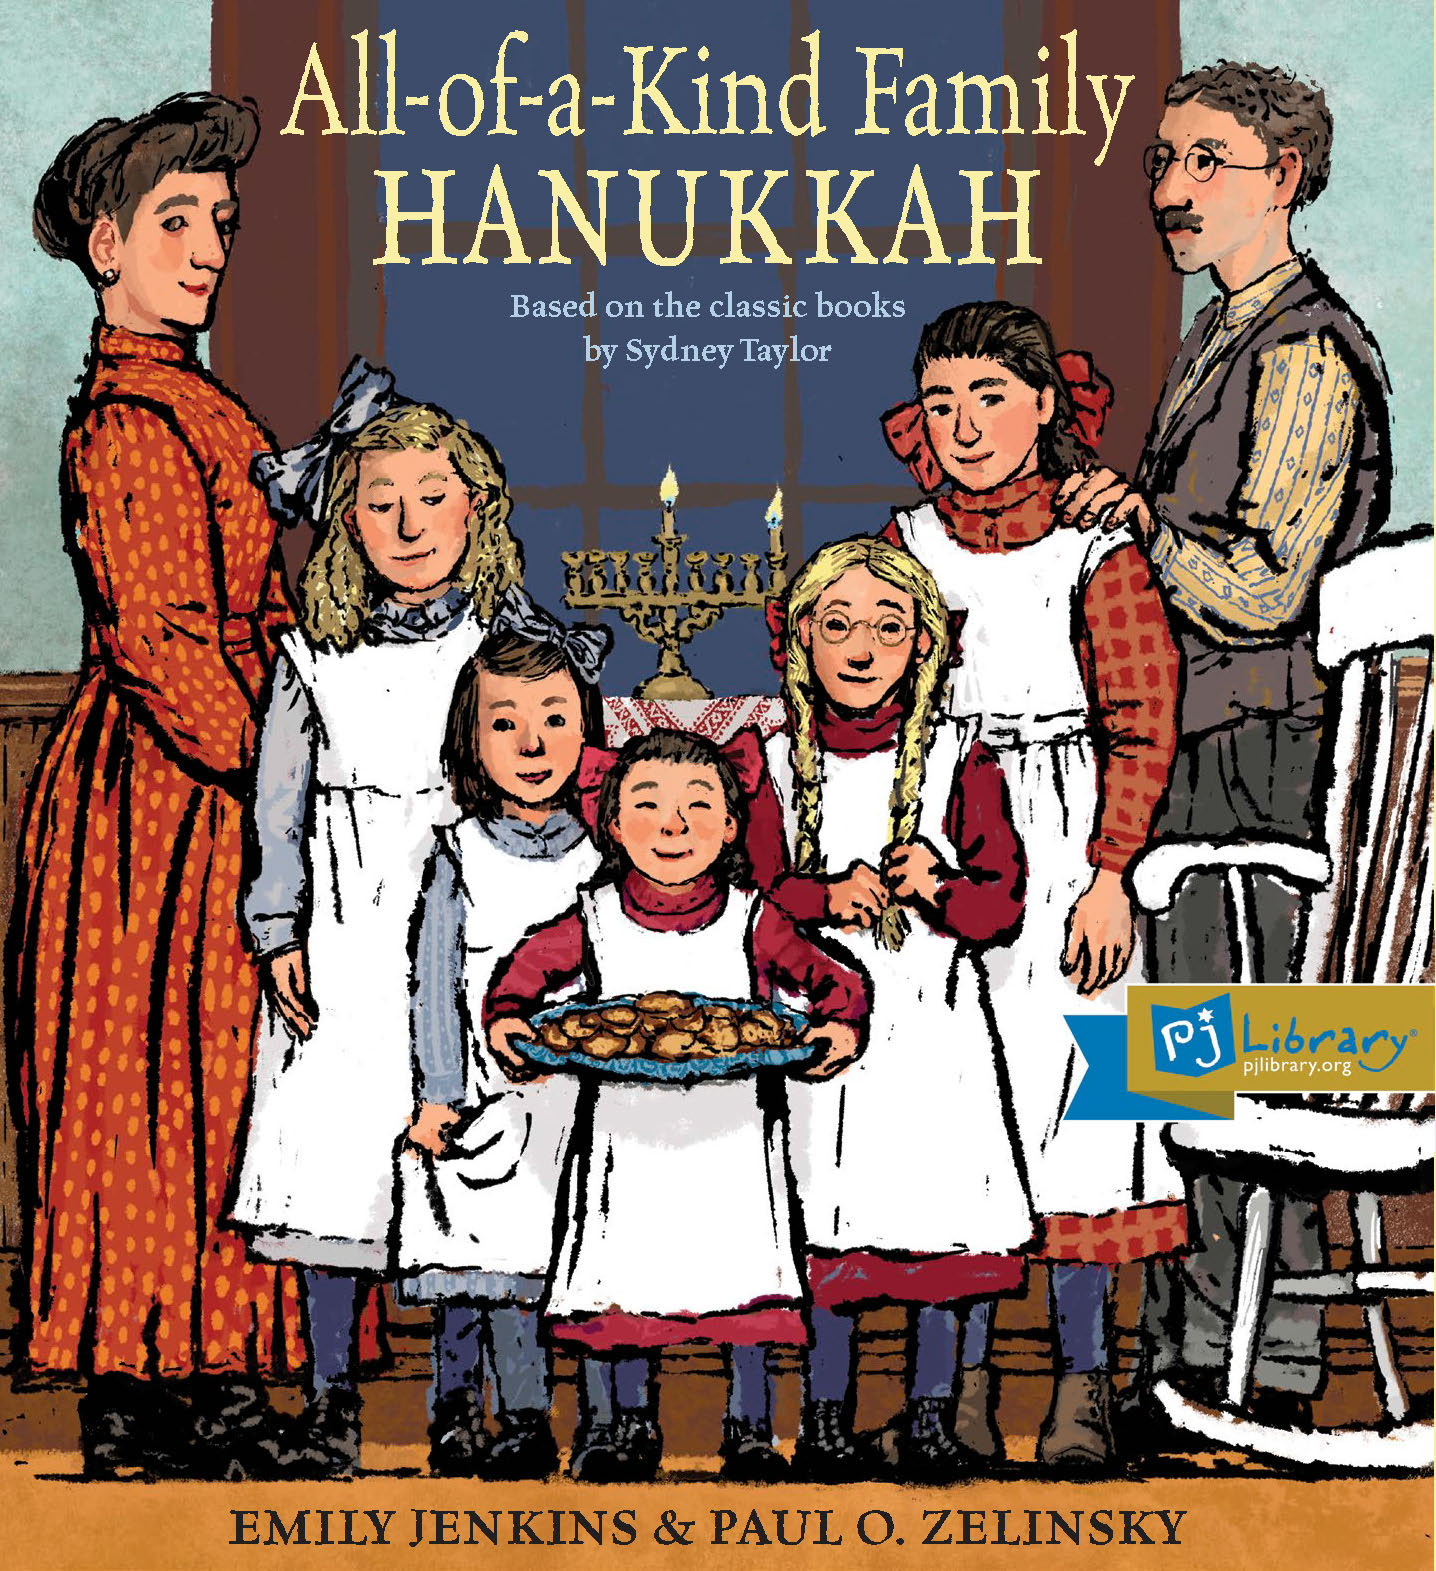 All-of-a-Kind Family Hanukkah by Emily Jenkins